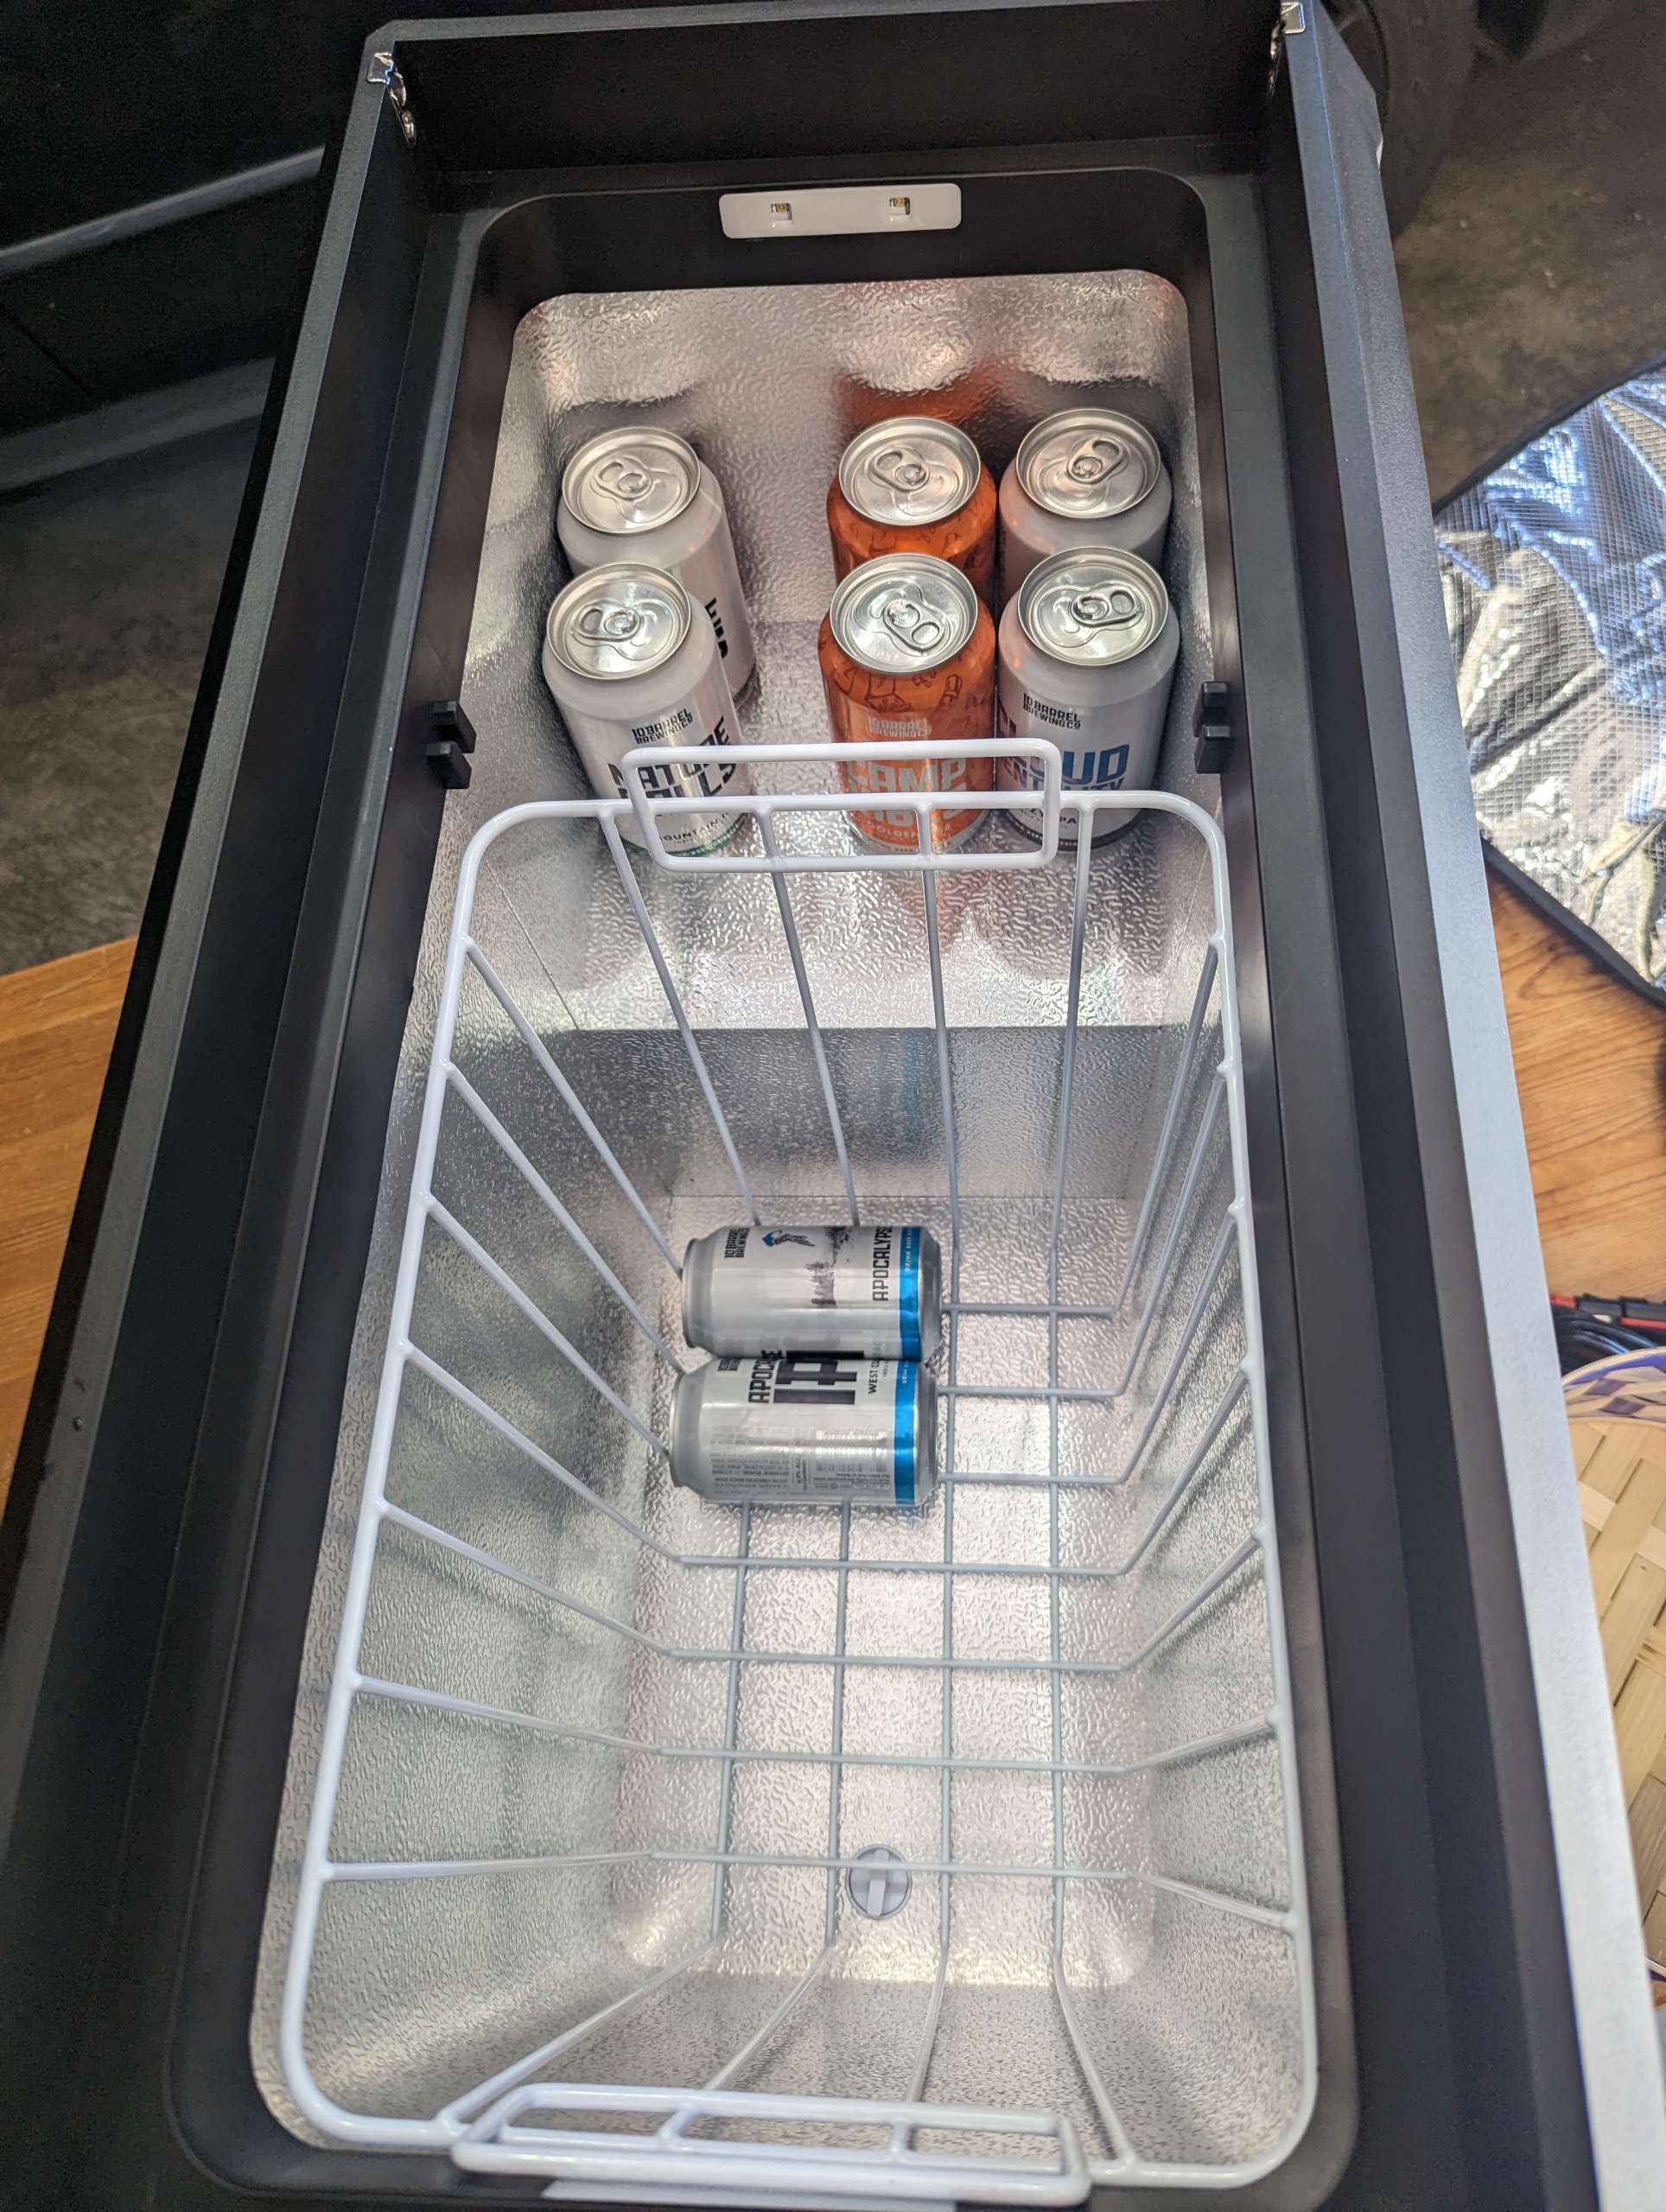 Iceco JP50 Pro 50L Wheeled Portable Freezer review - my new road